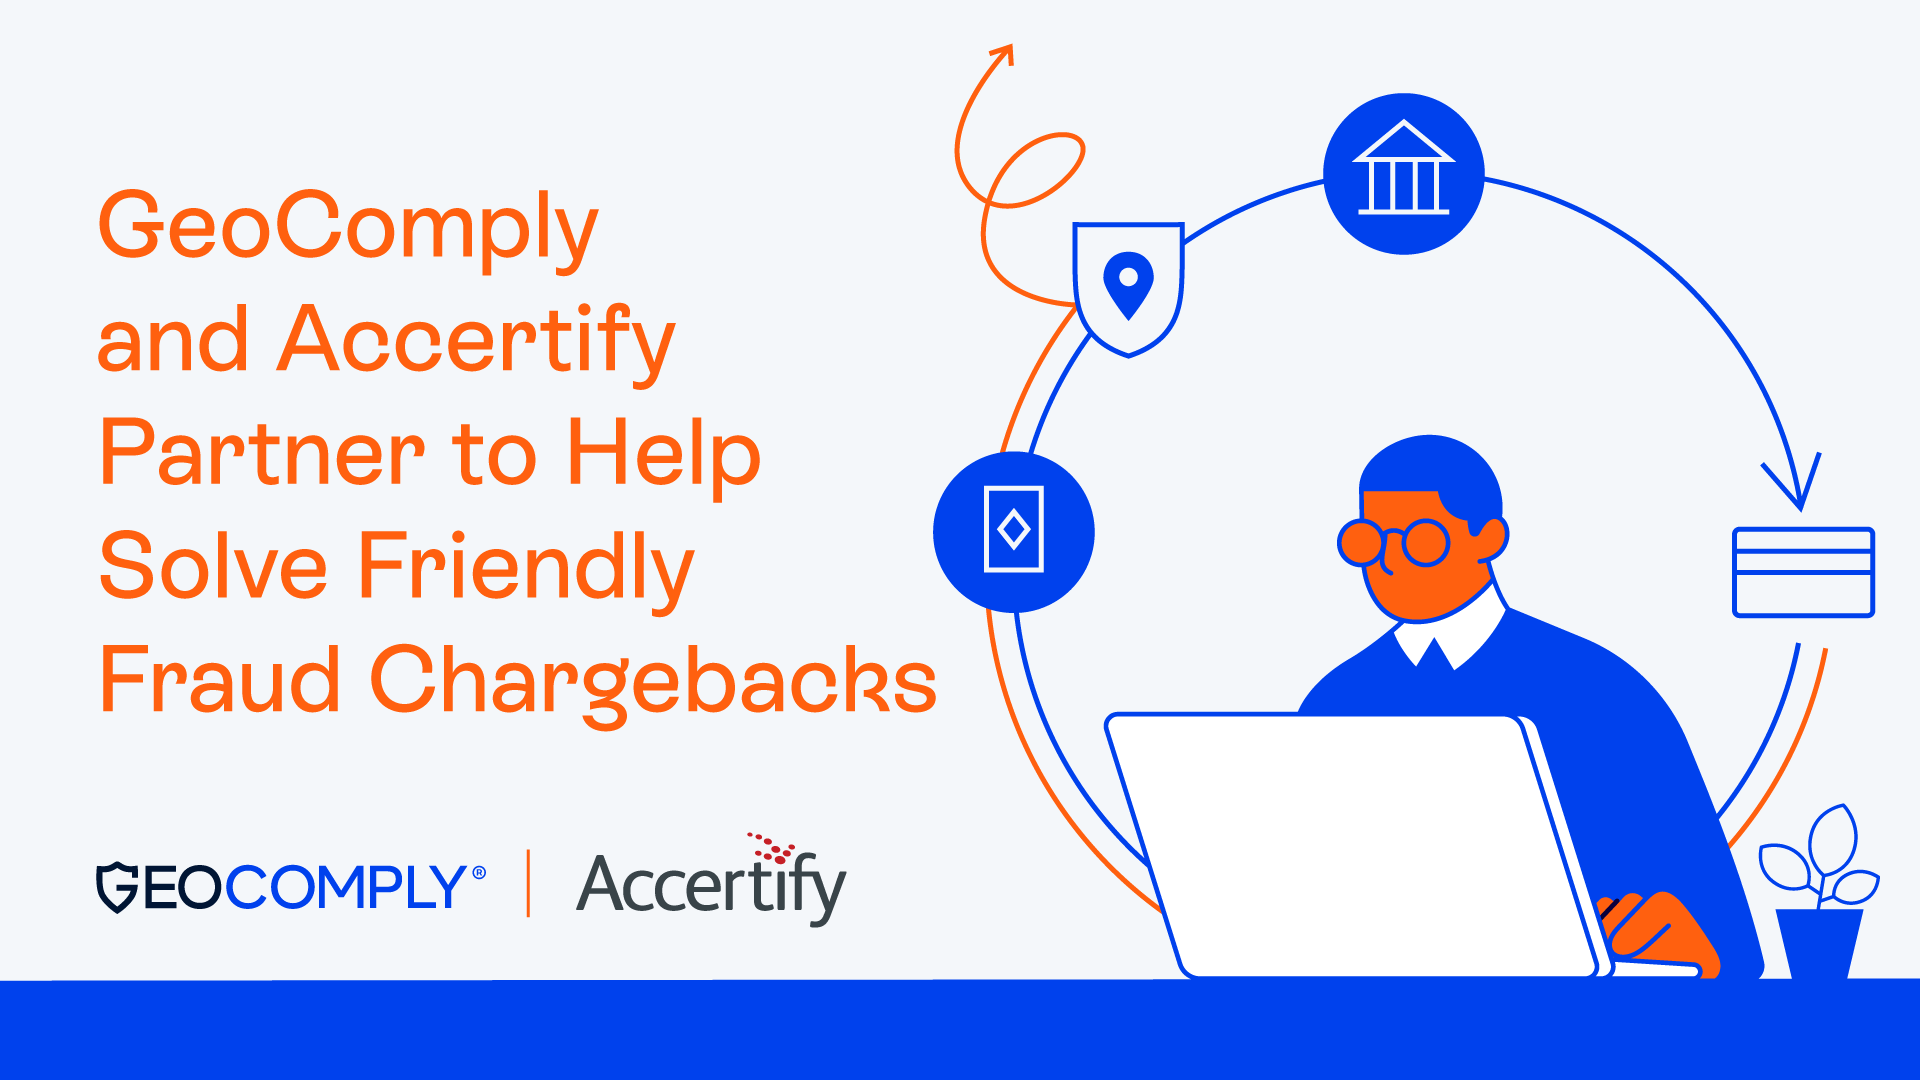 GeoComply-Accertify_partnership_chargeback_fraud